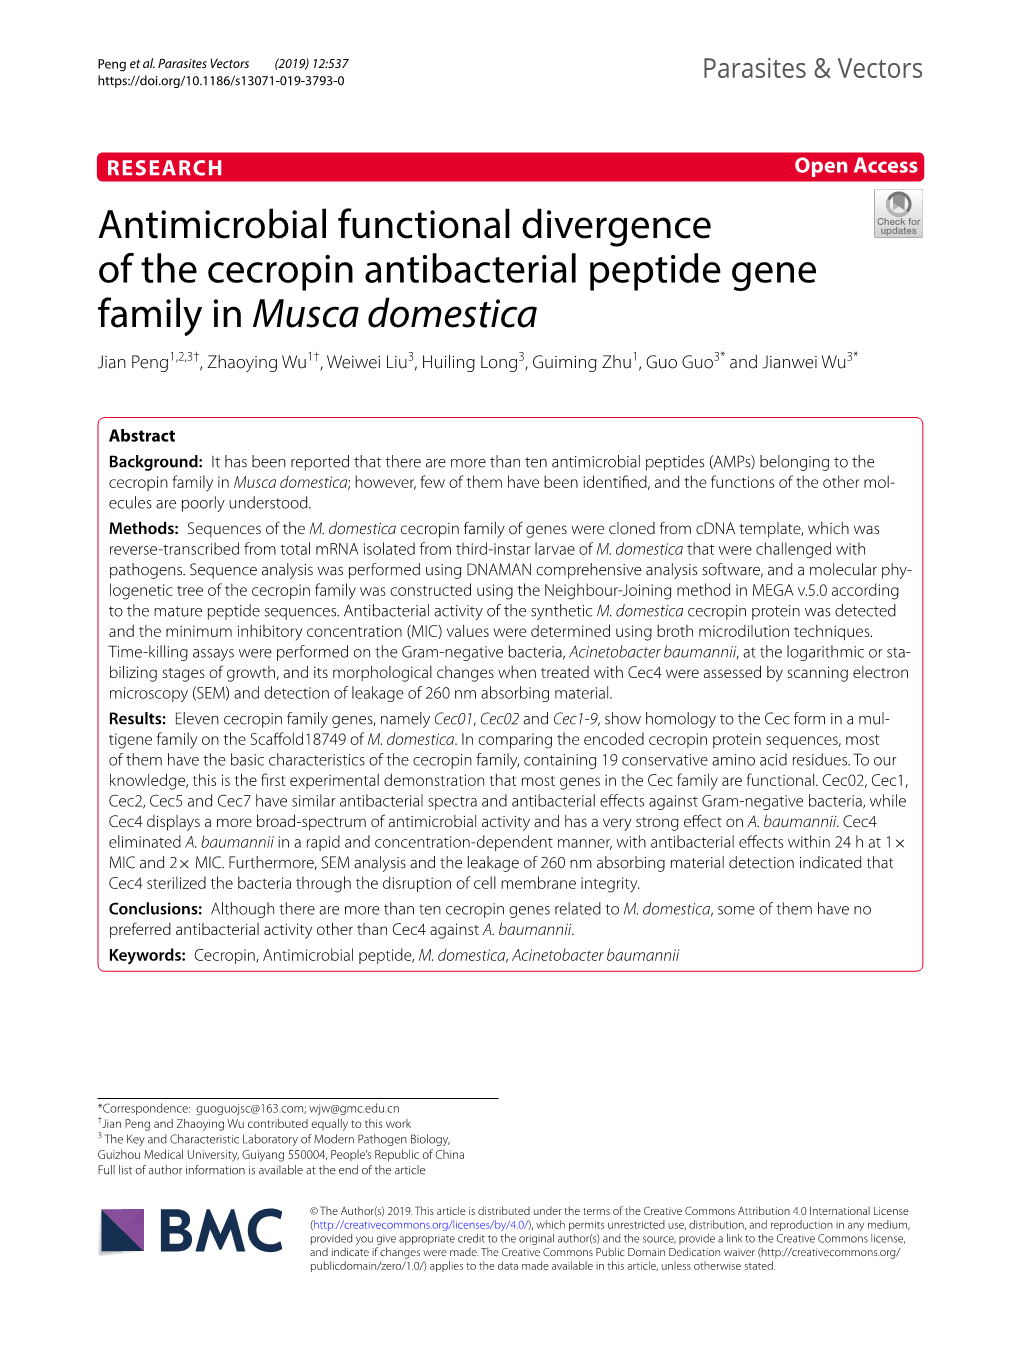 Antimicrobial Functional Divergence of the Cecropin Antibacterial Peptide